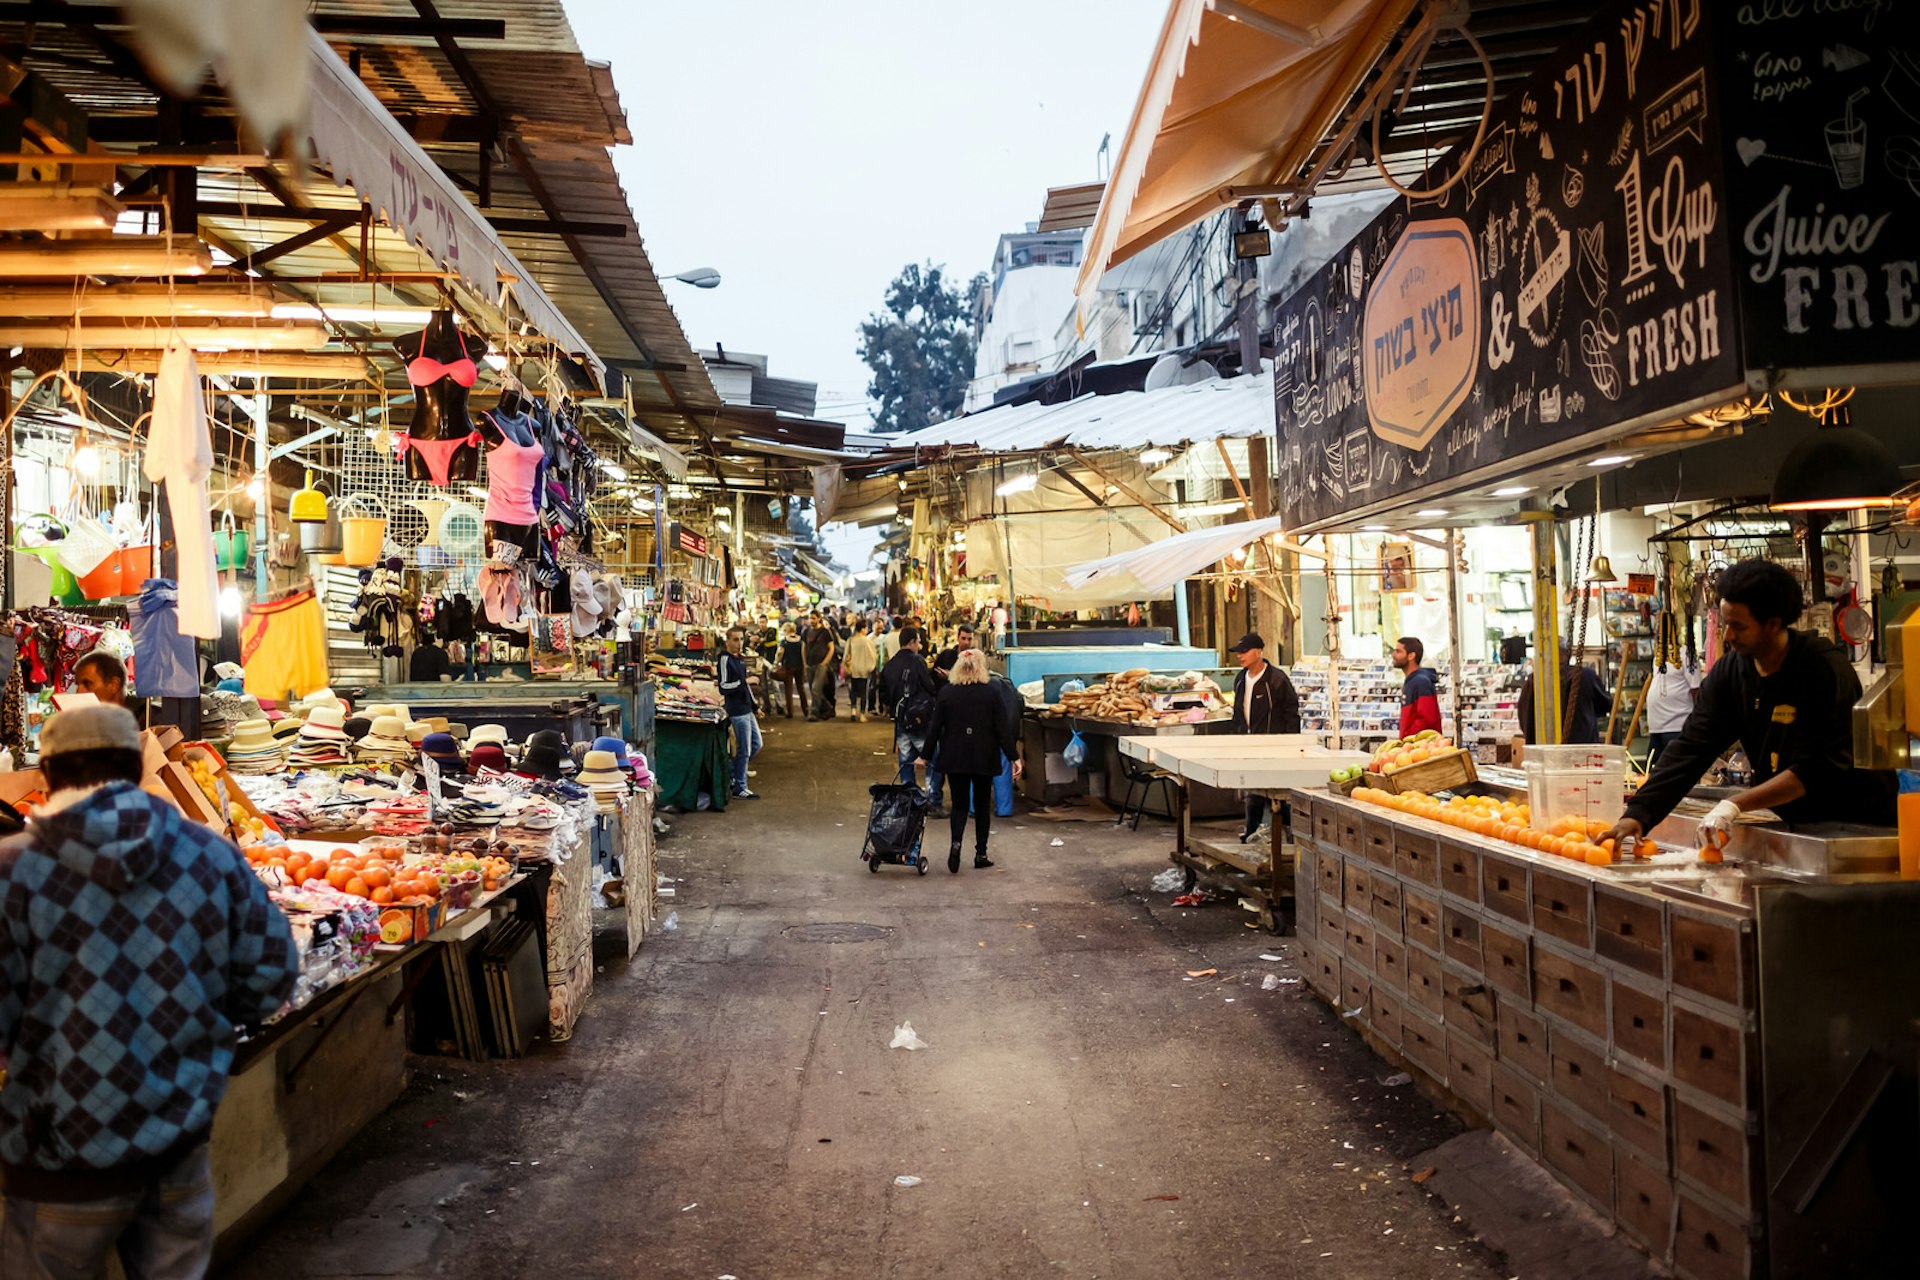 Shoppers at the Carmel Market in Tel Aviv, Israel. It's one of Israel's oldest outdoor marketplaces offers a wide variety of foods and merchandise. Image by Andrey Bayda / Shutterstock